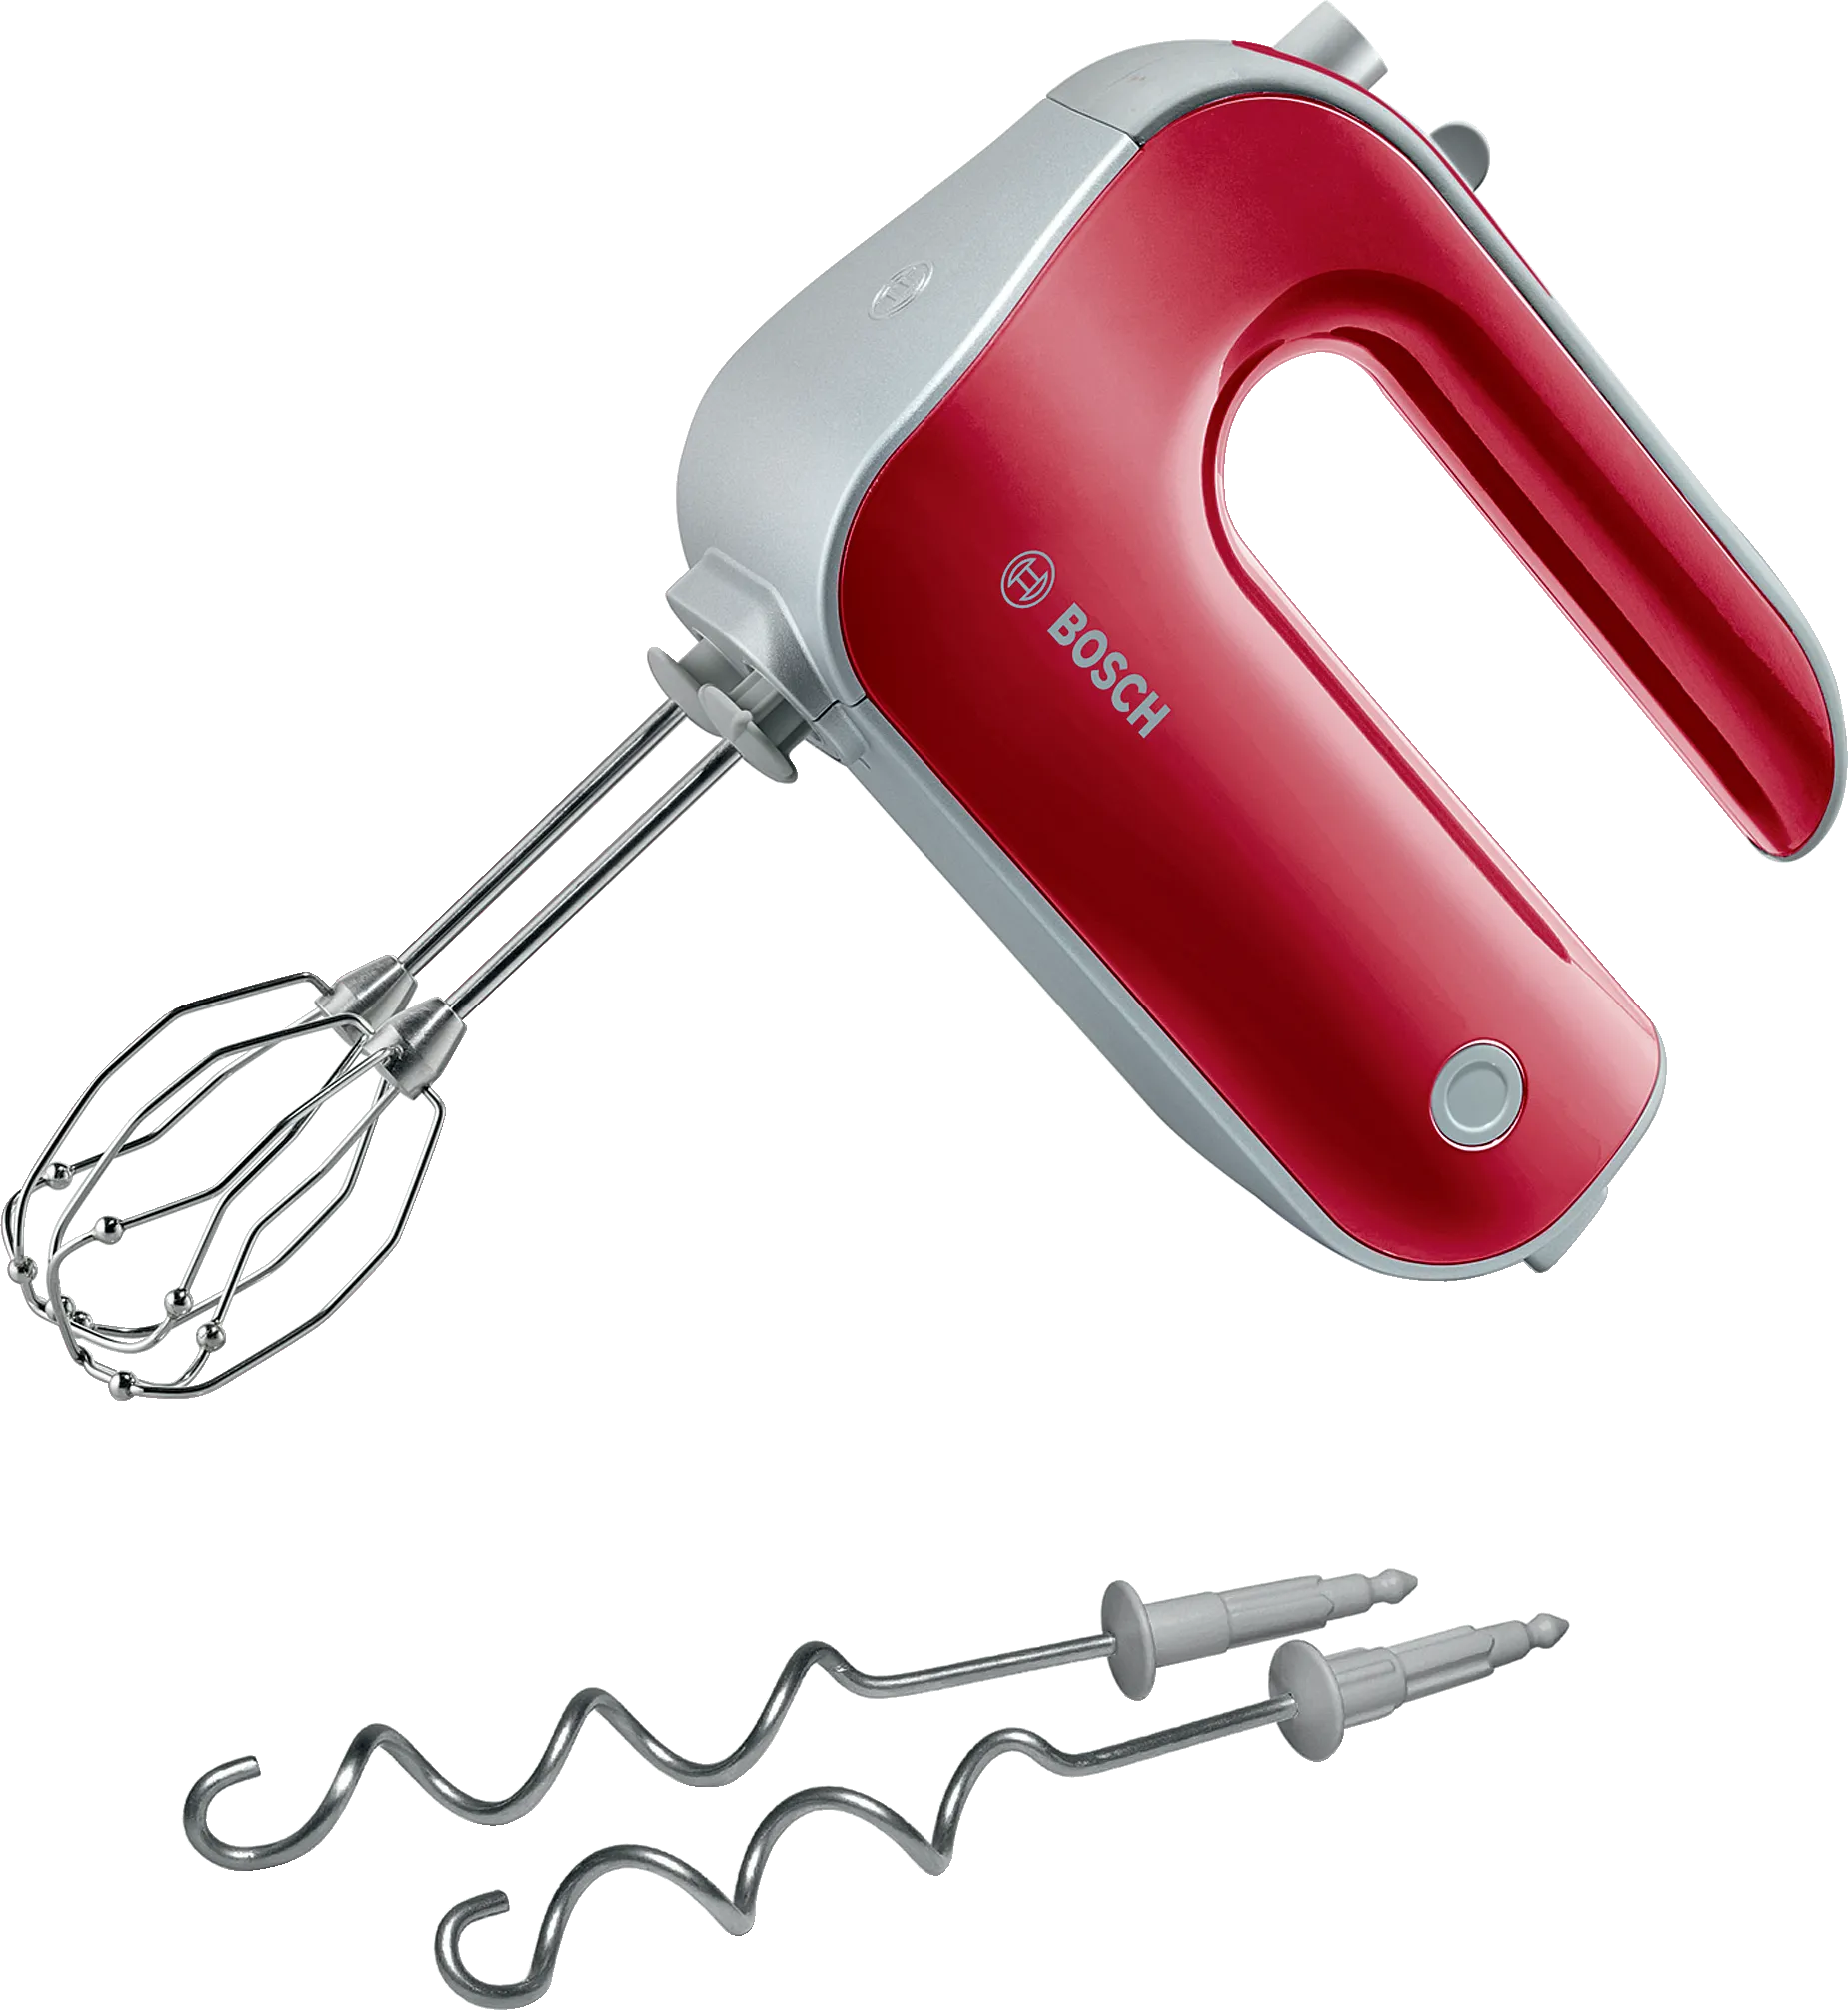 Hand mixer Styline Colour 500 W Red, Silver 